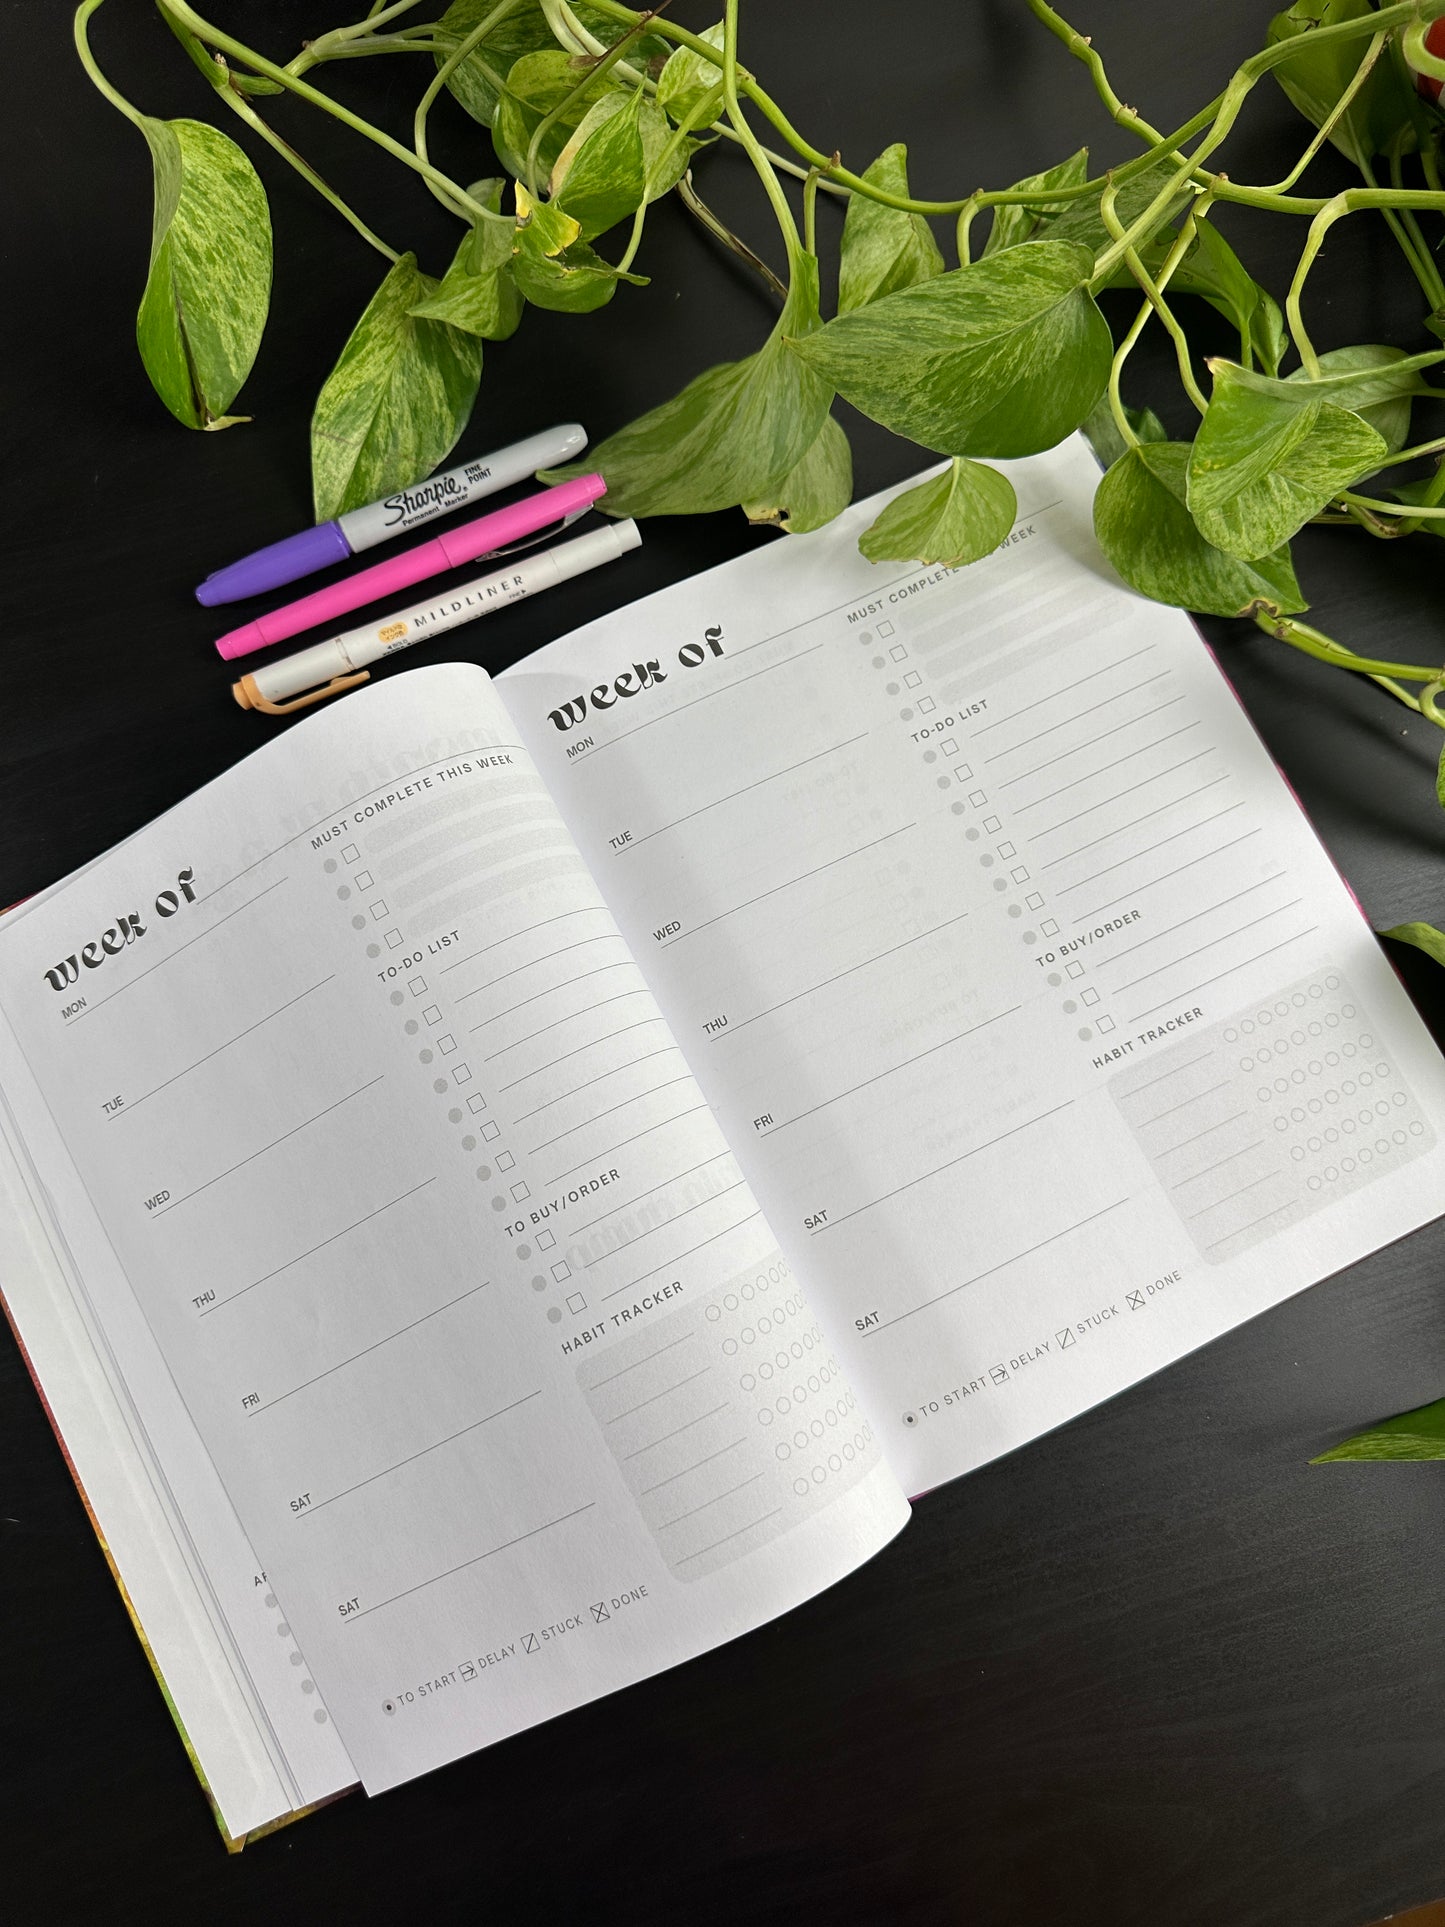 Undated Weekly Planner - Spiral Bound Softcover (Multiple Colors)